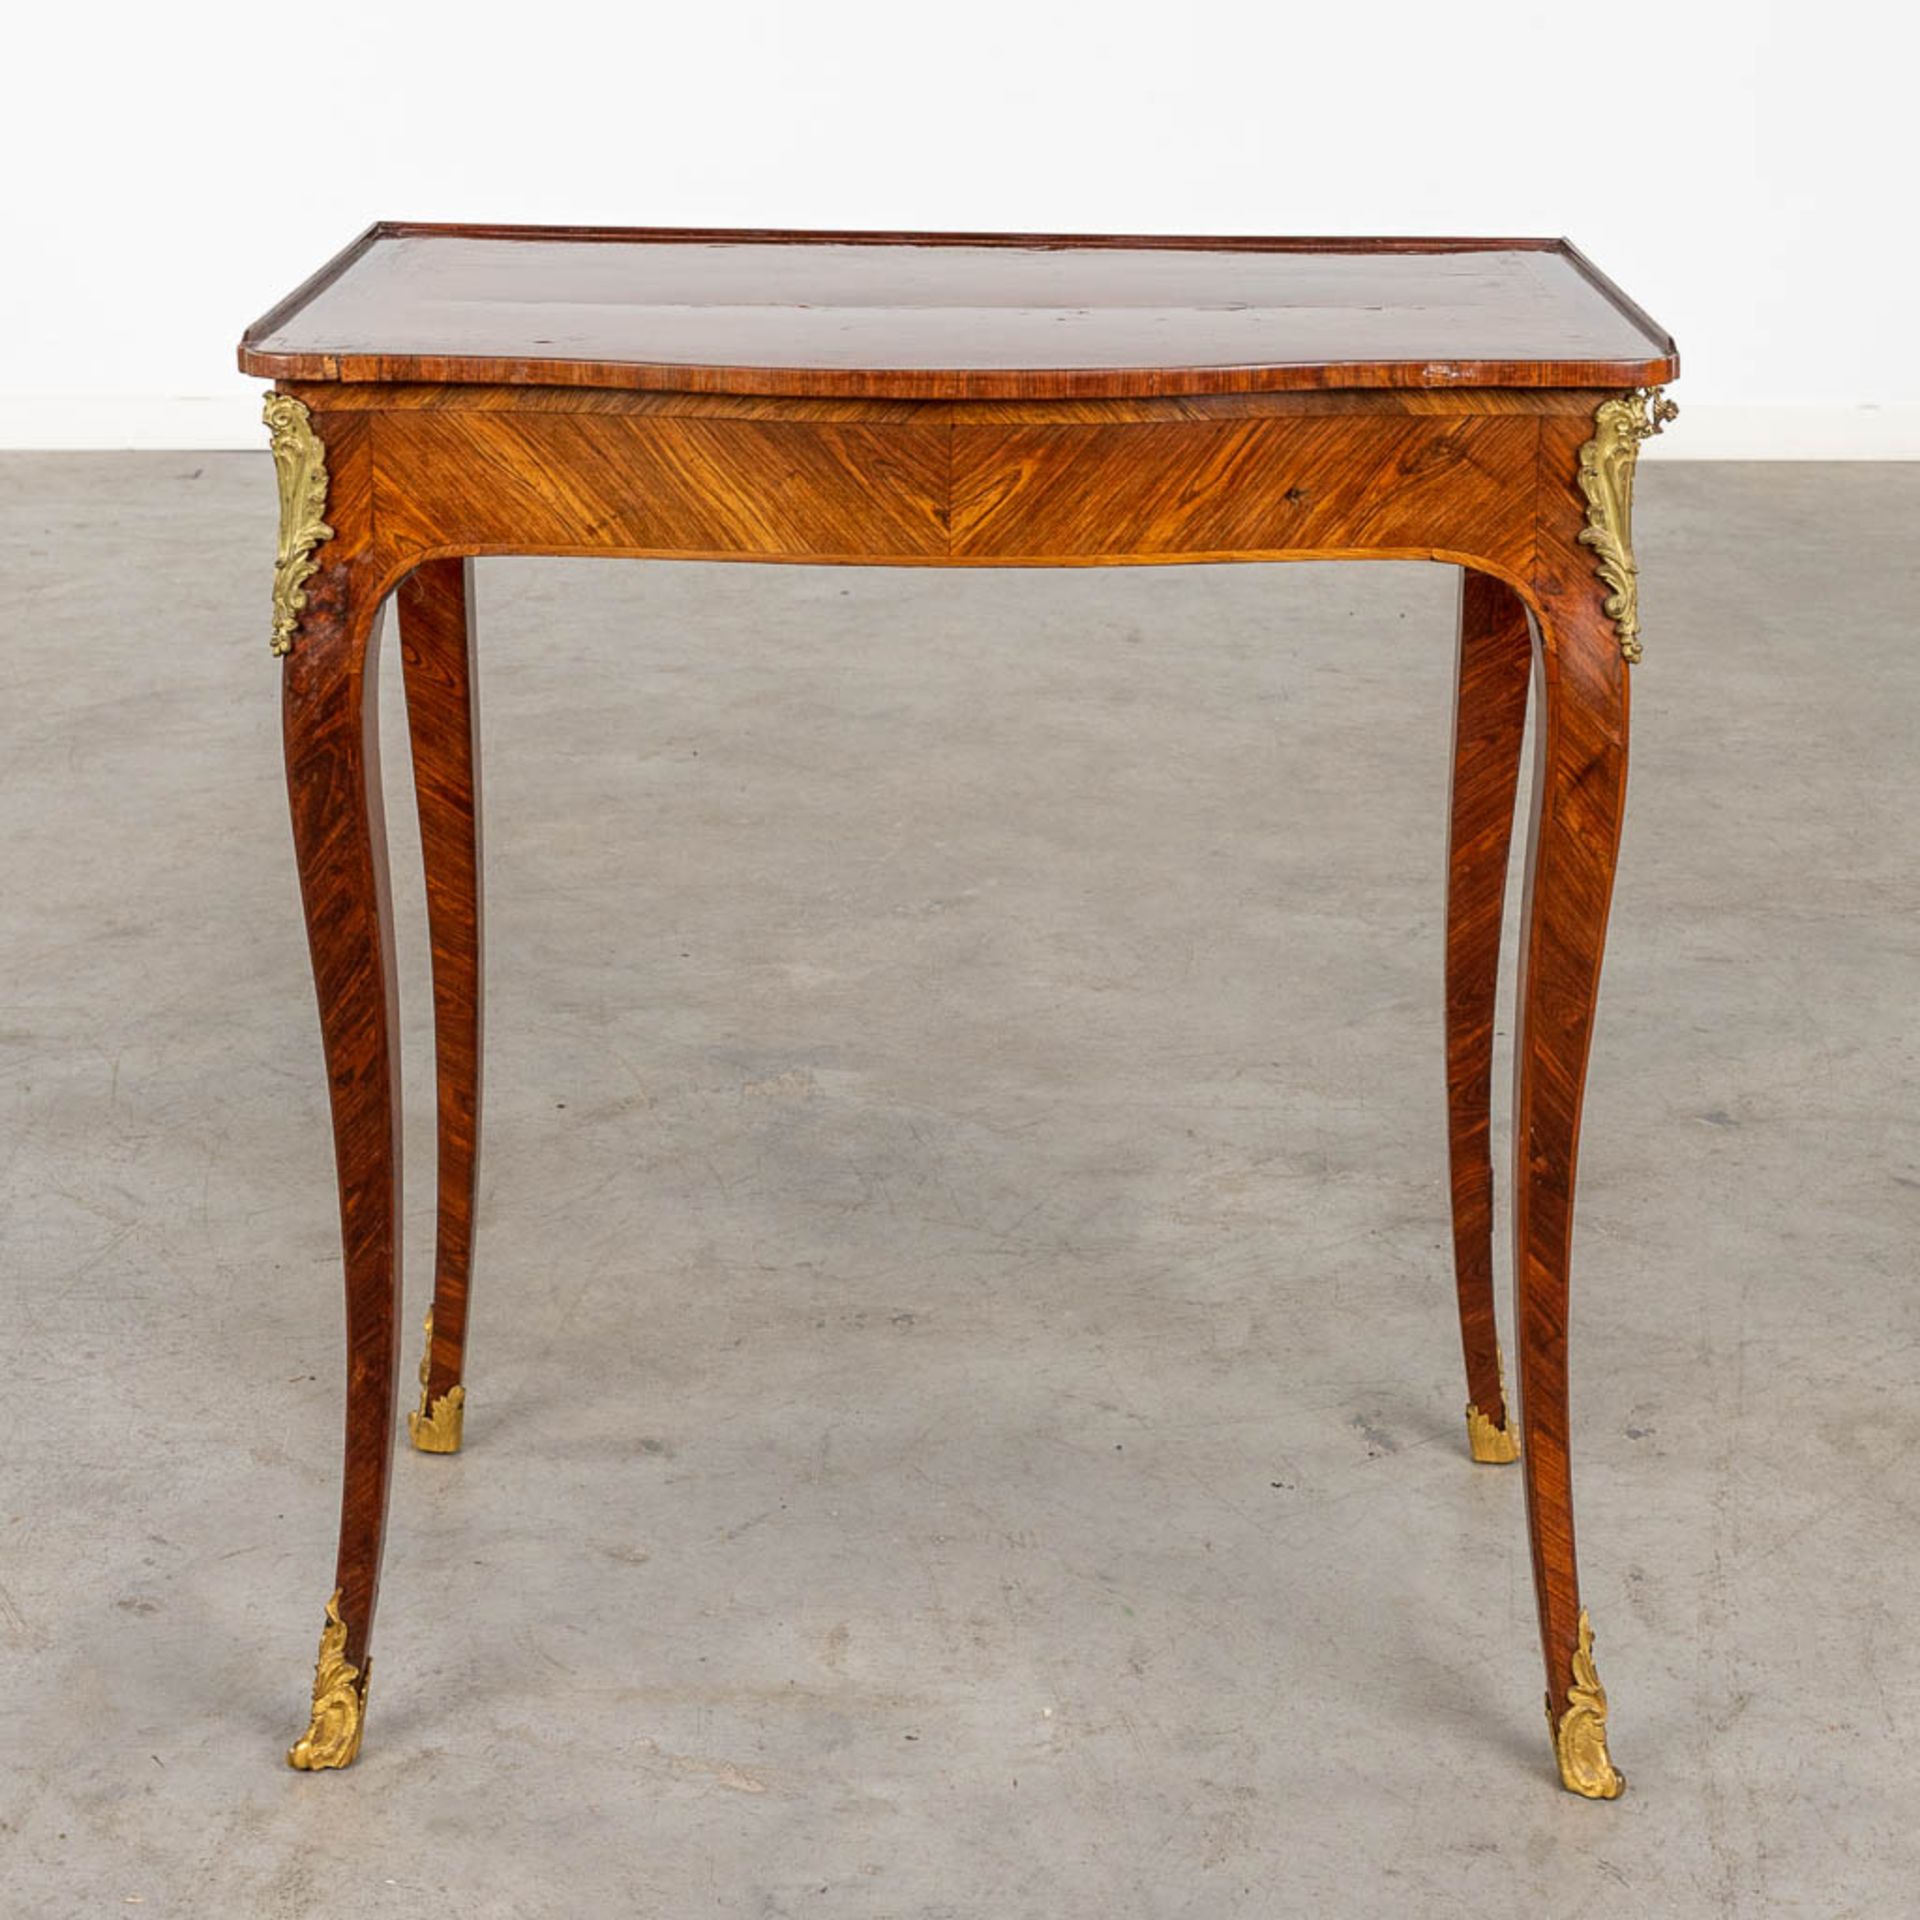 An antique side table, Louis XV, marquetry mounted with bronze, 18th C. (D:43 x W:64 x H: - Image 3 of 14